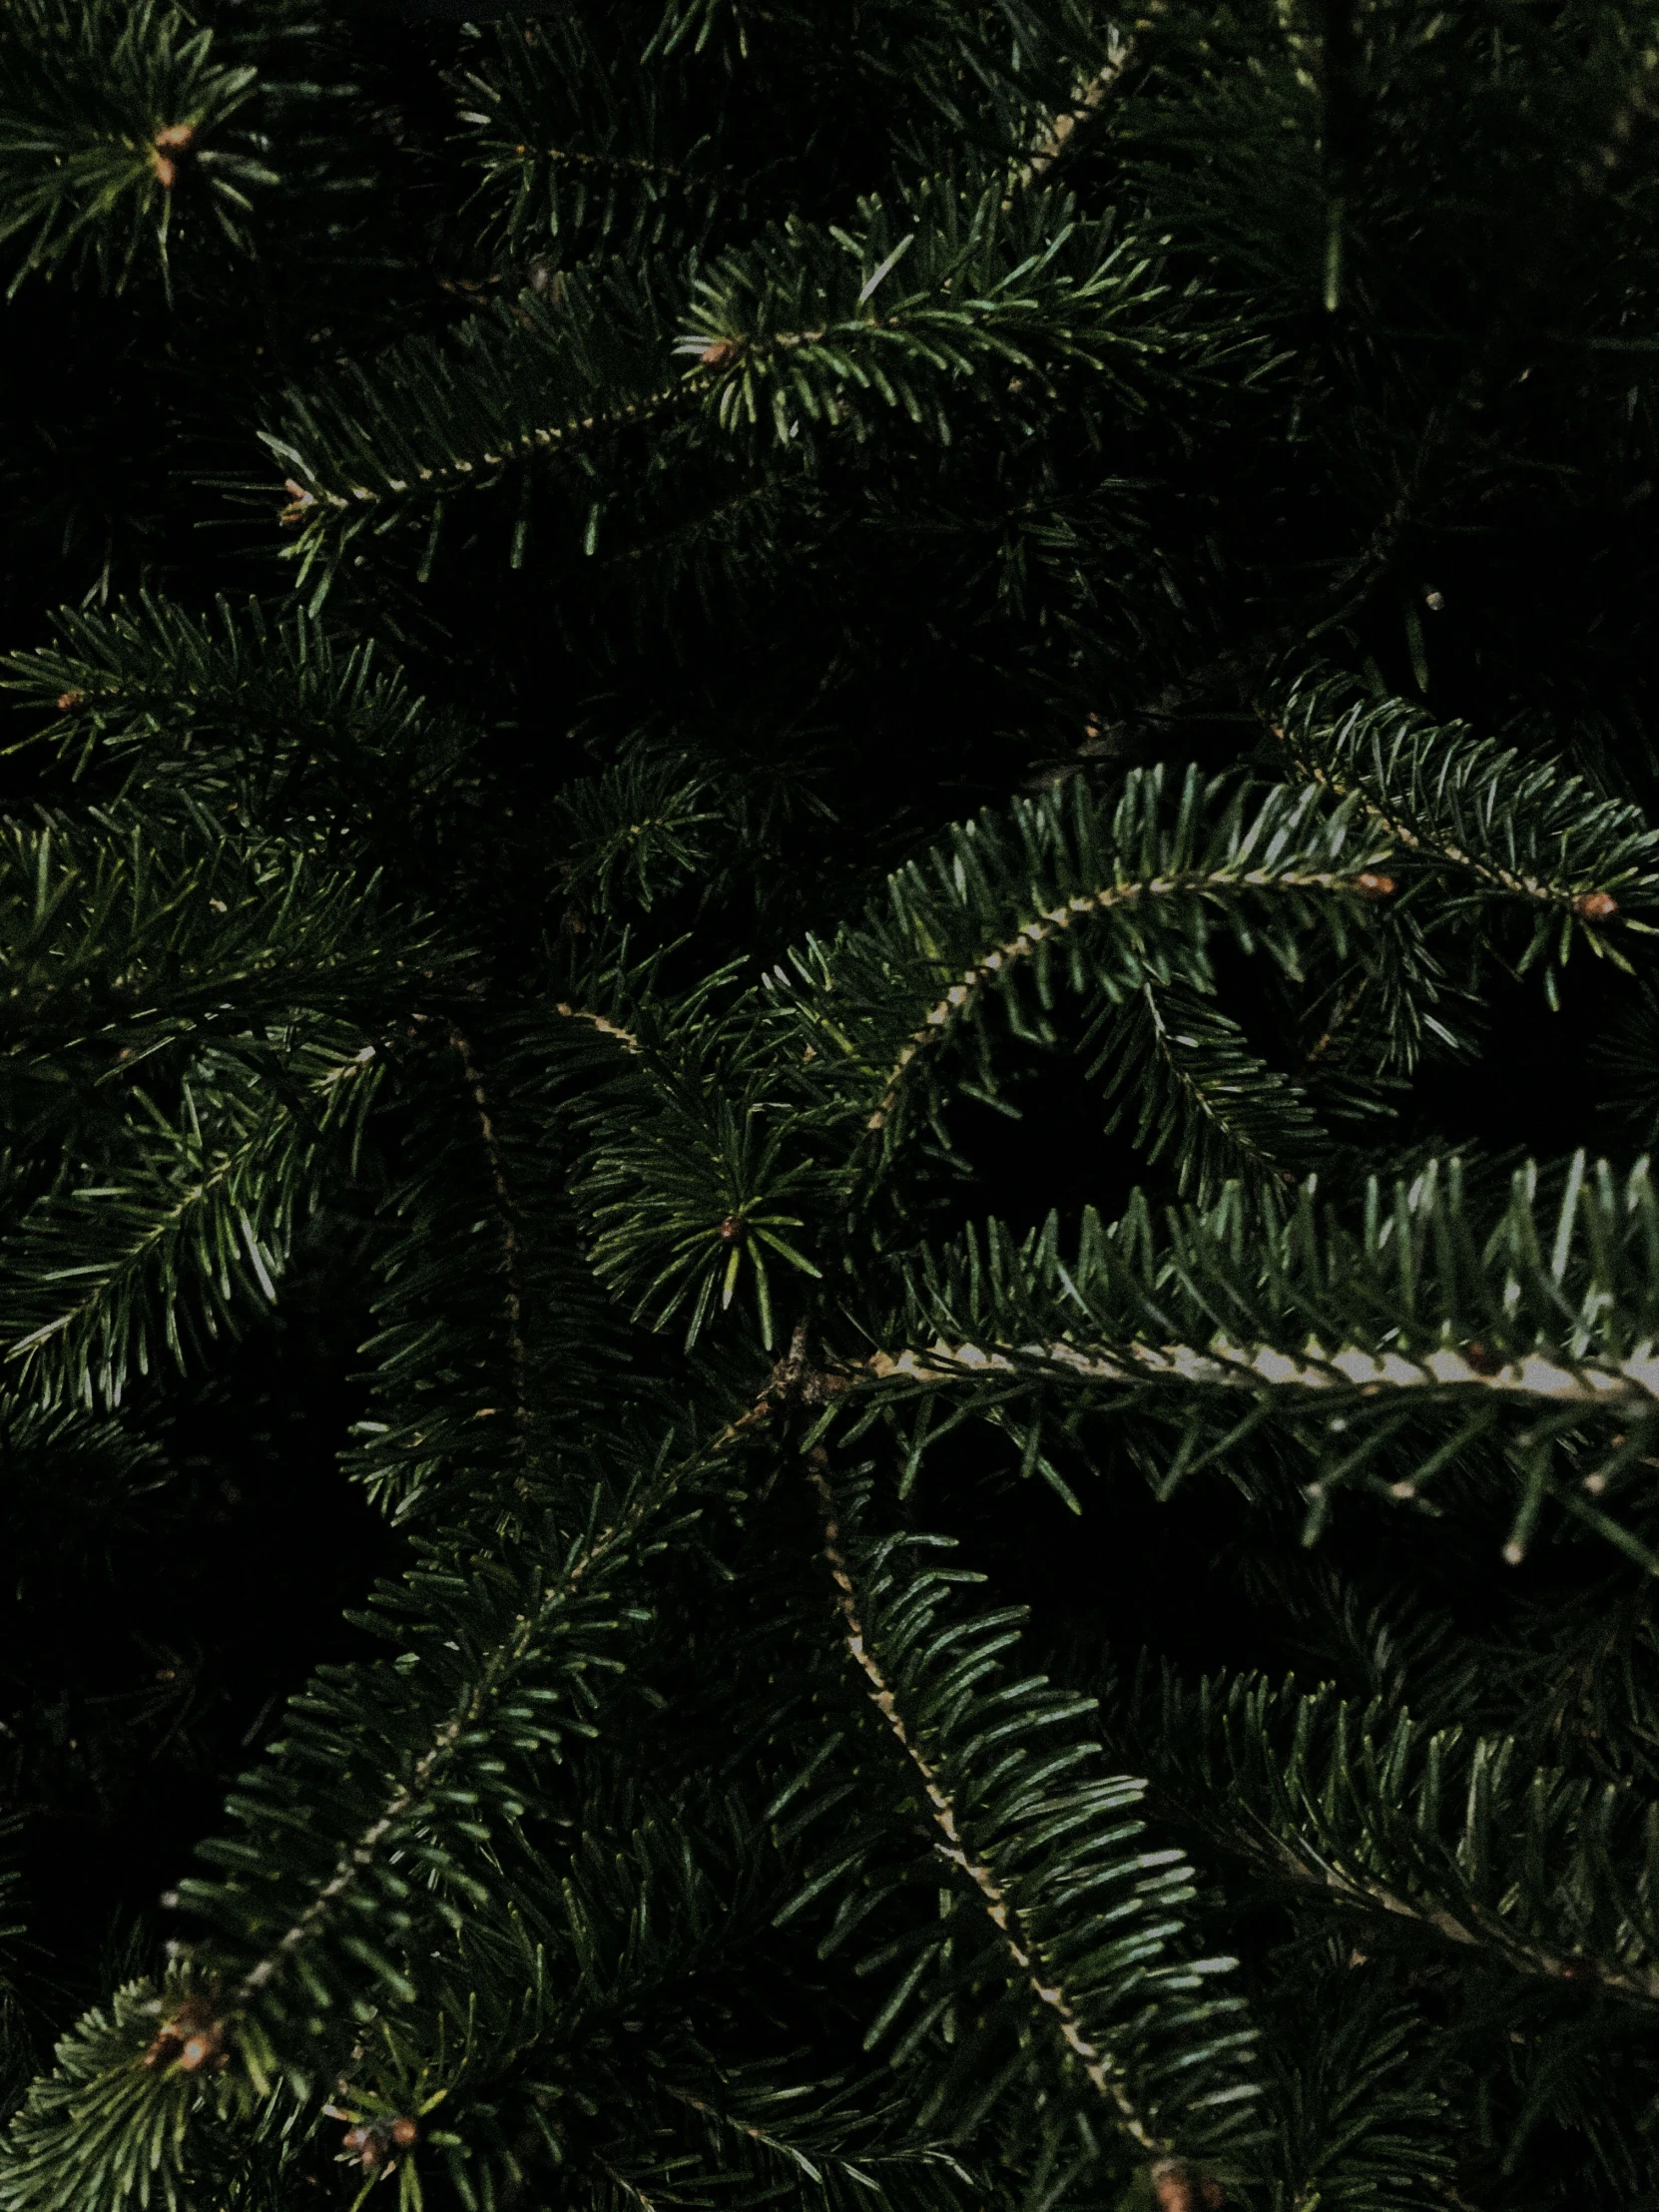 pine needles are displayed in the dark light